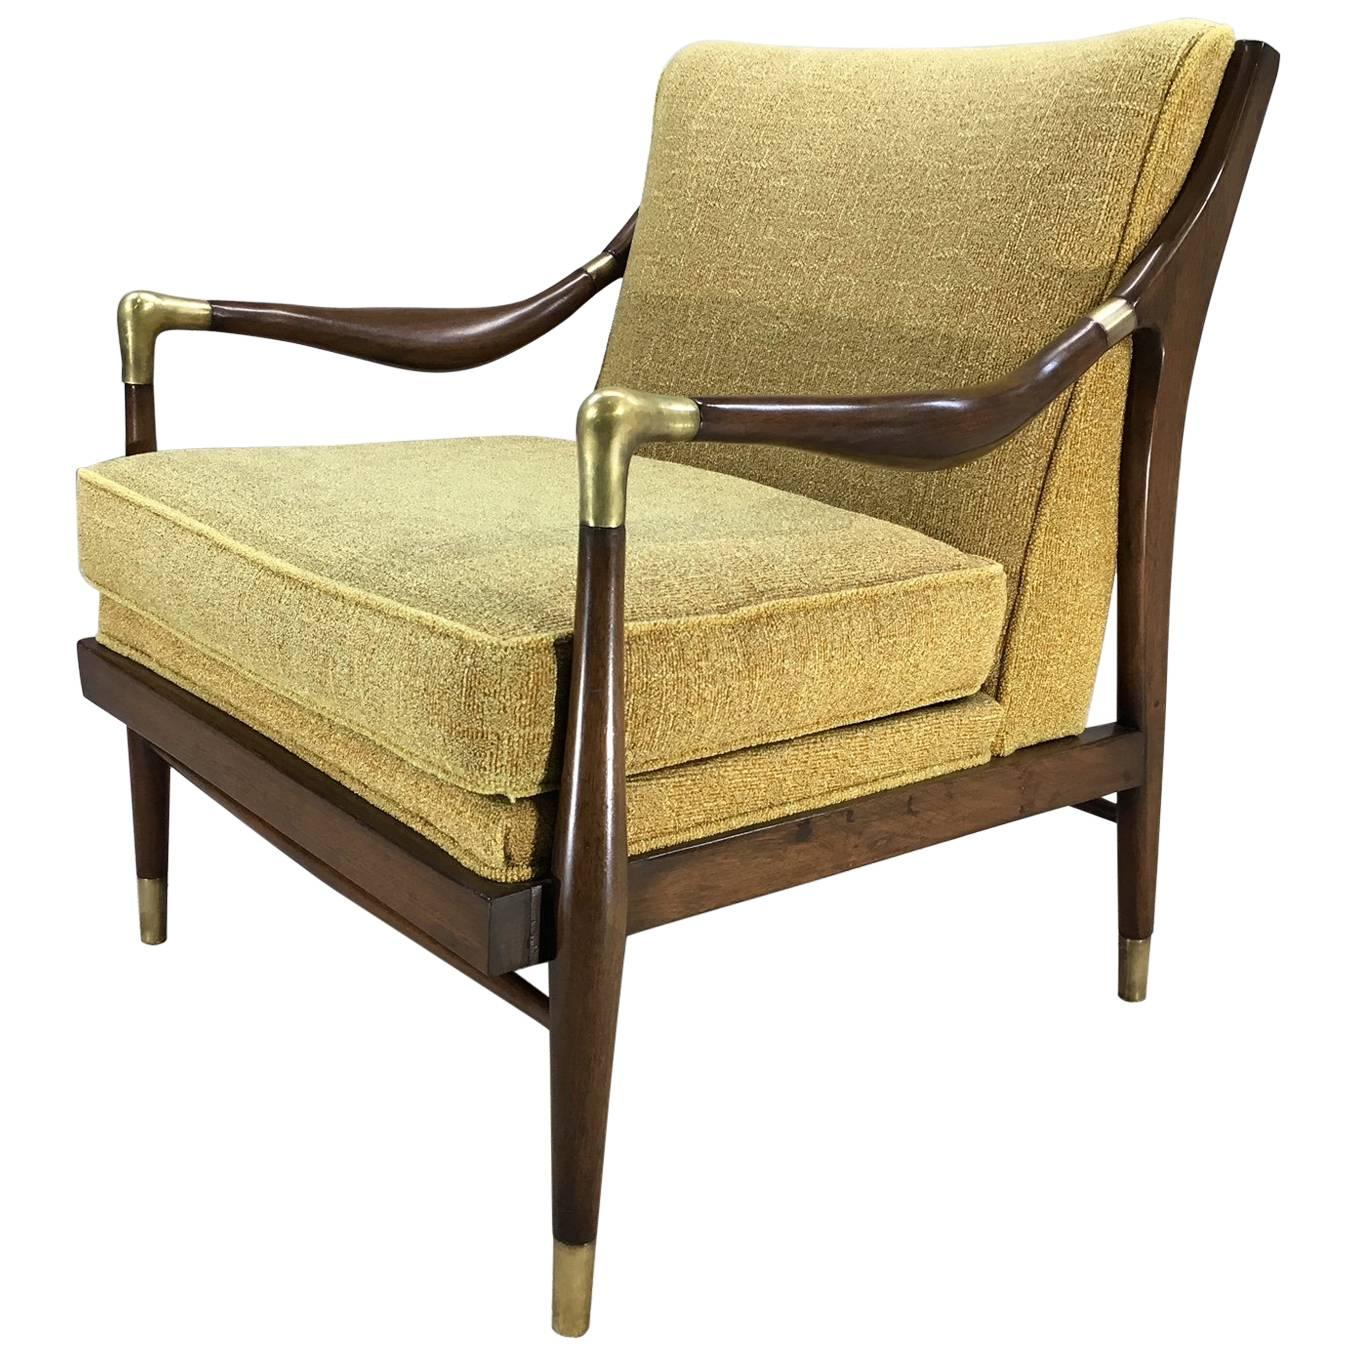 Gio Ponti Style Sculptural Walnut Open Armchair by Jamestown Royal, 1950s